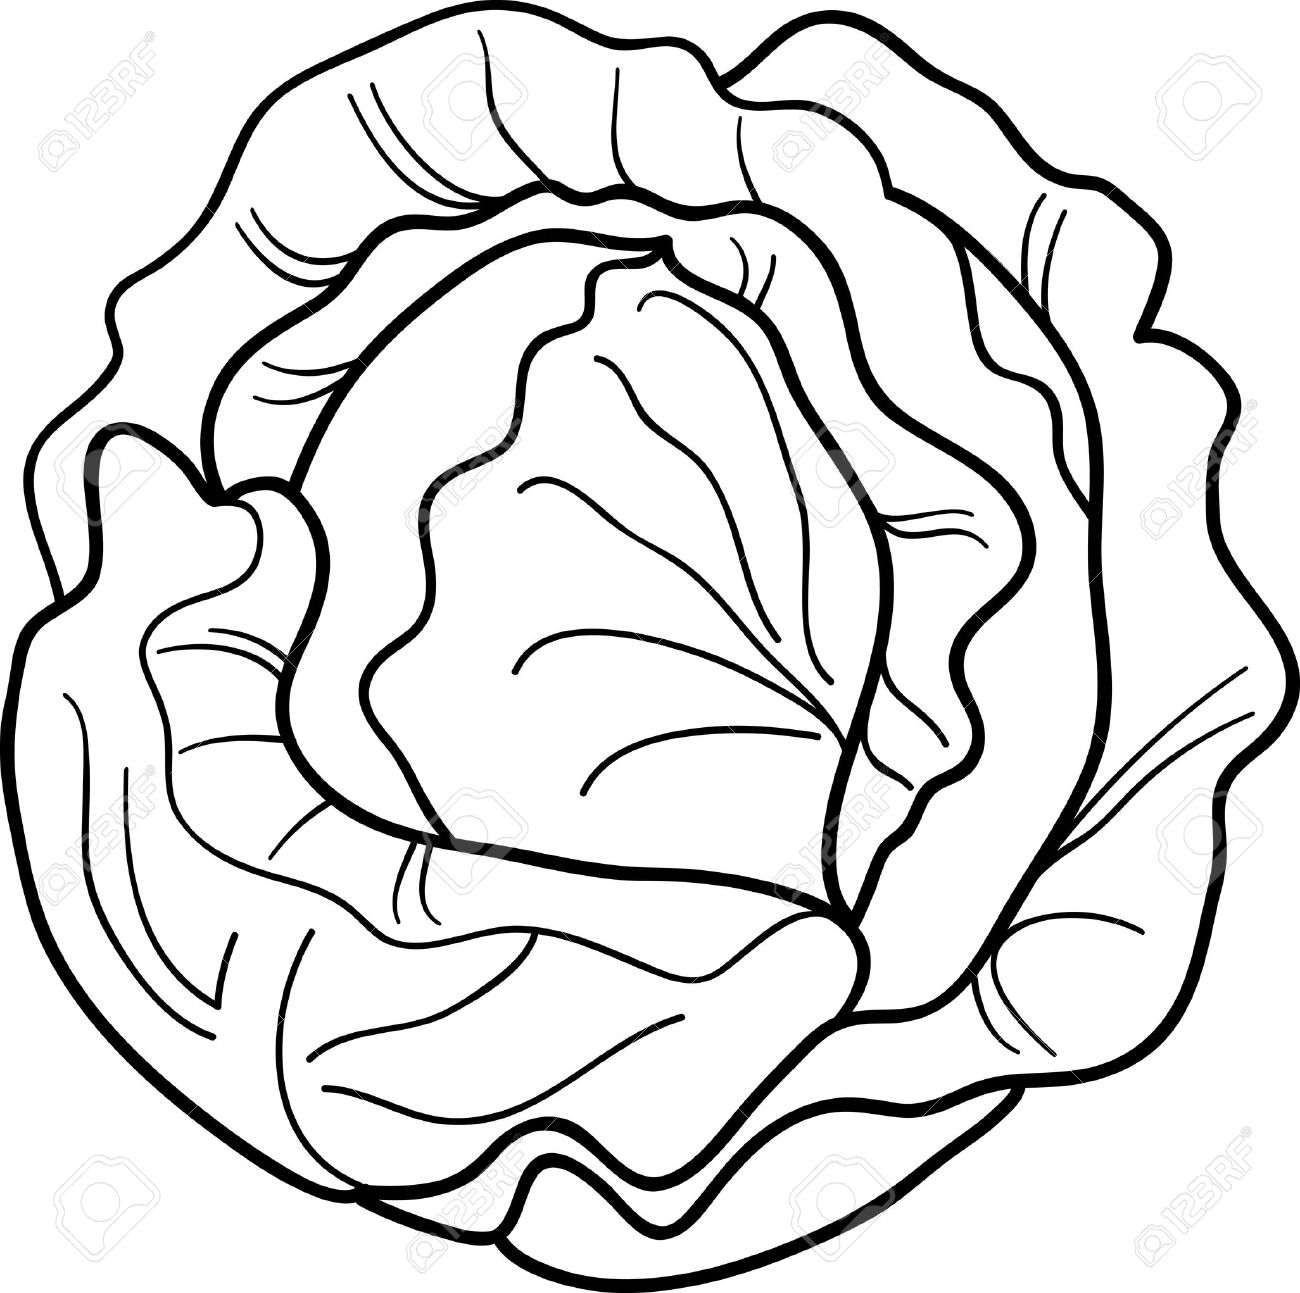 Cabbage clipart black and white.